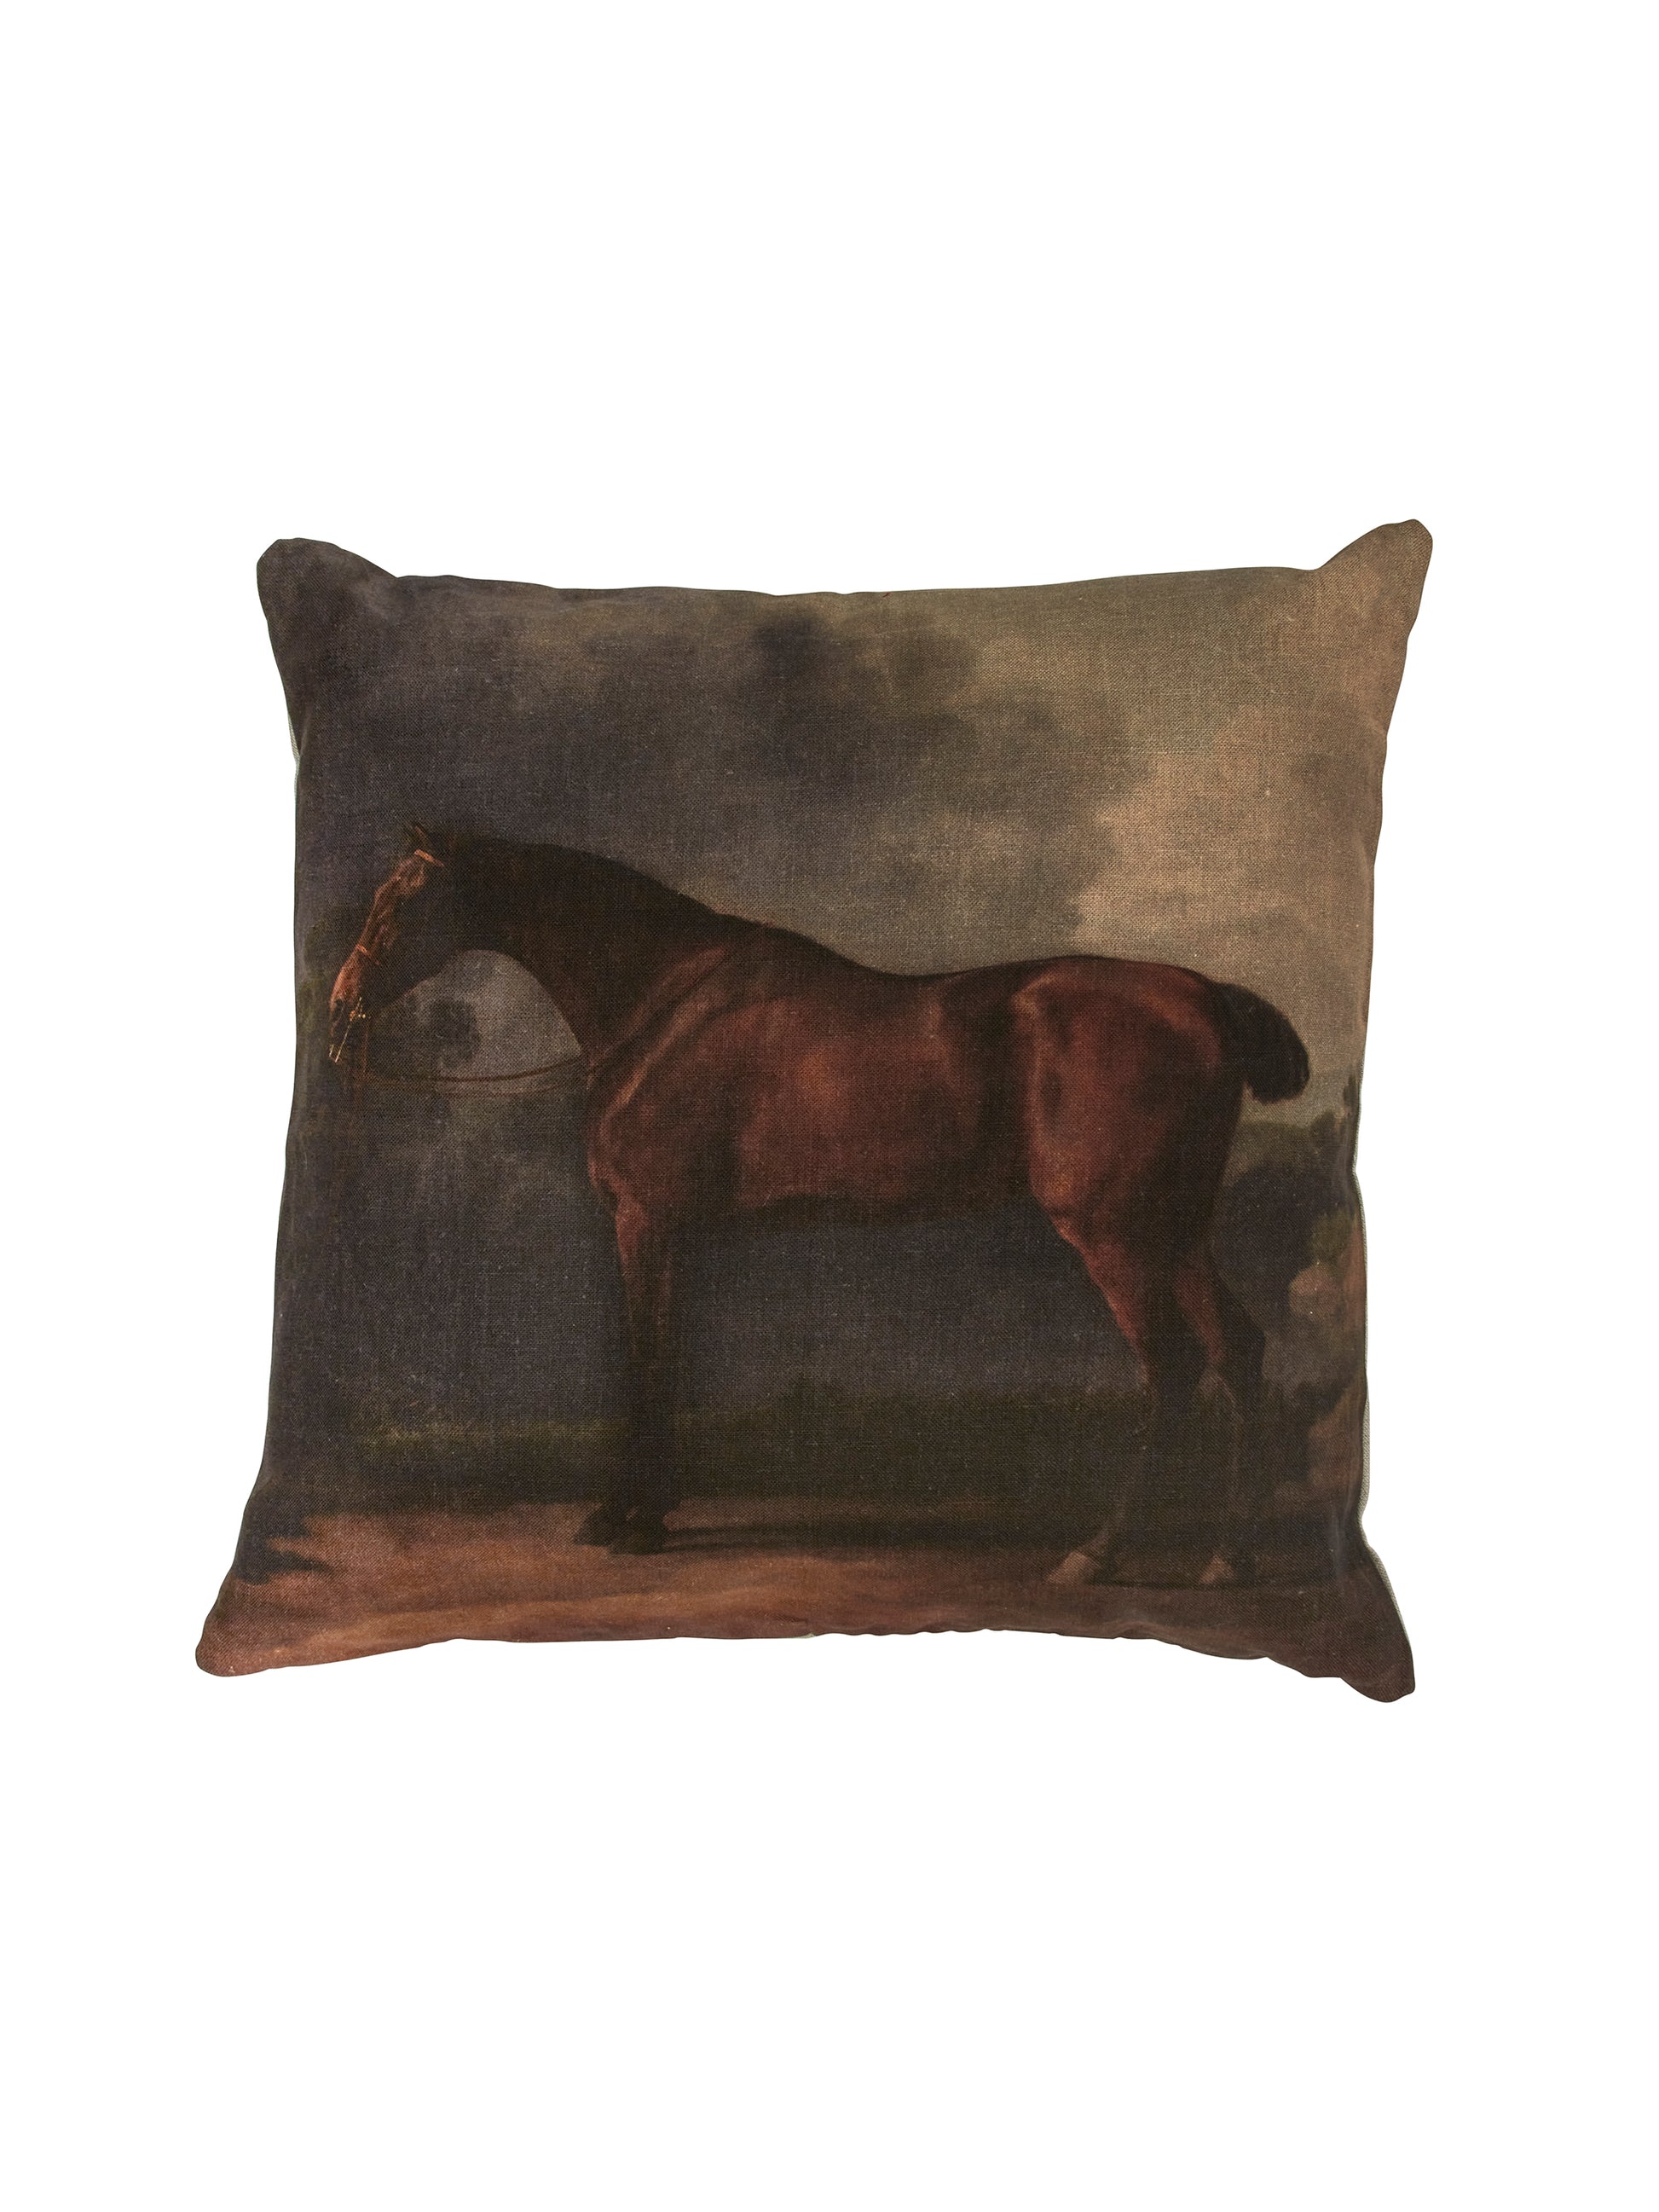 Thoroughbred Horse Pillow 22" Square Weston Table